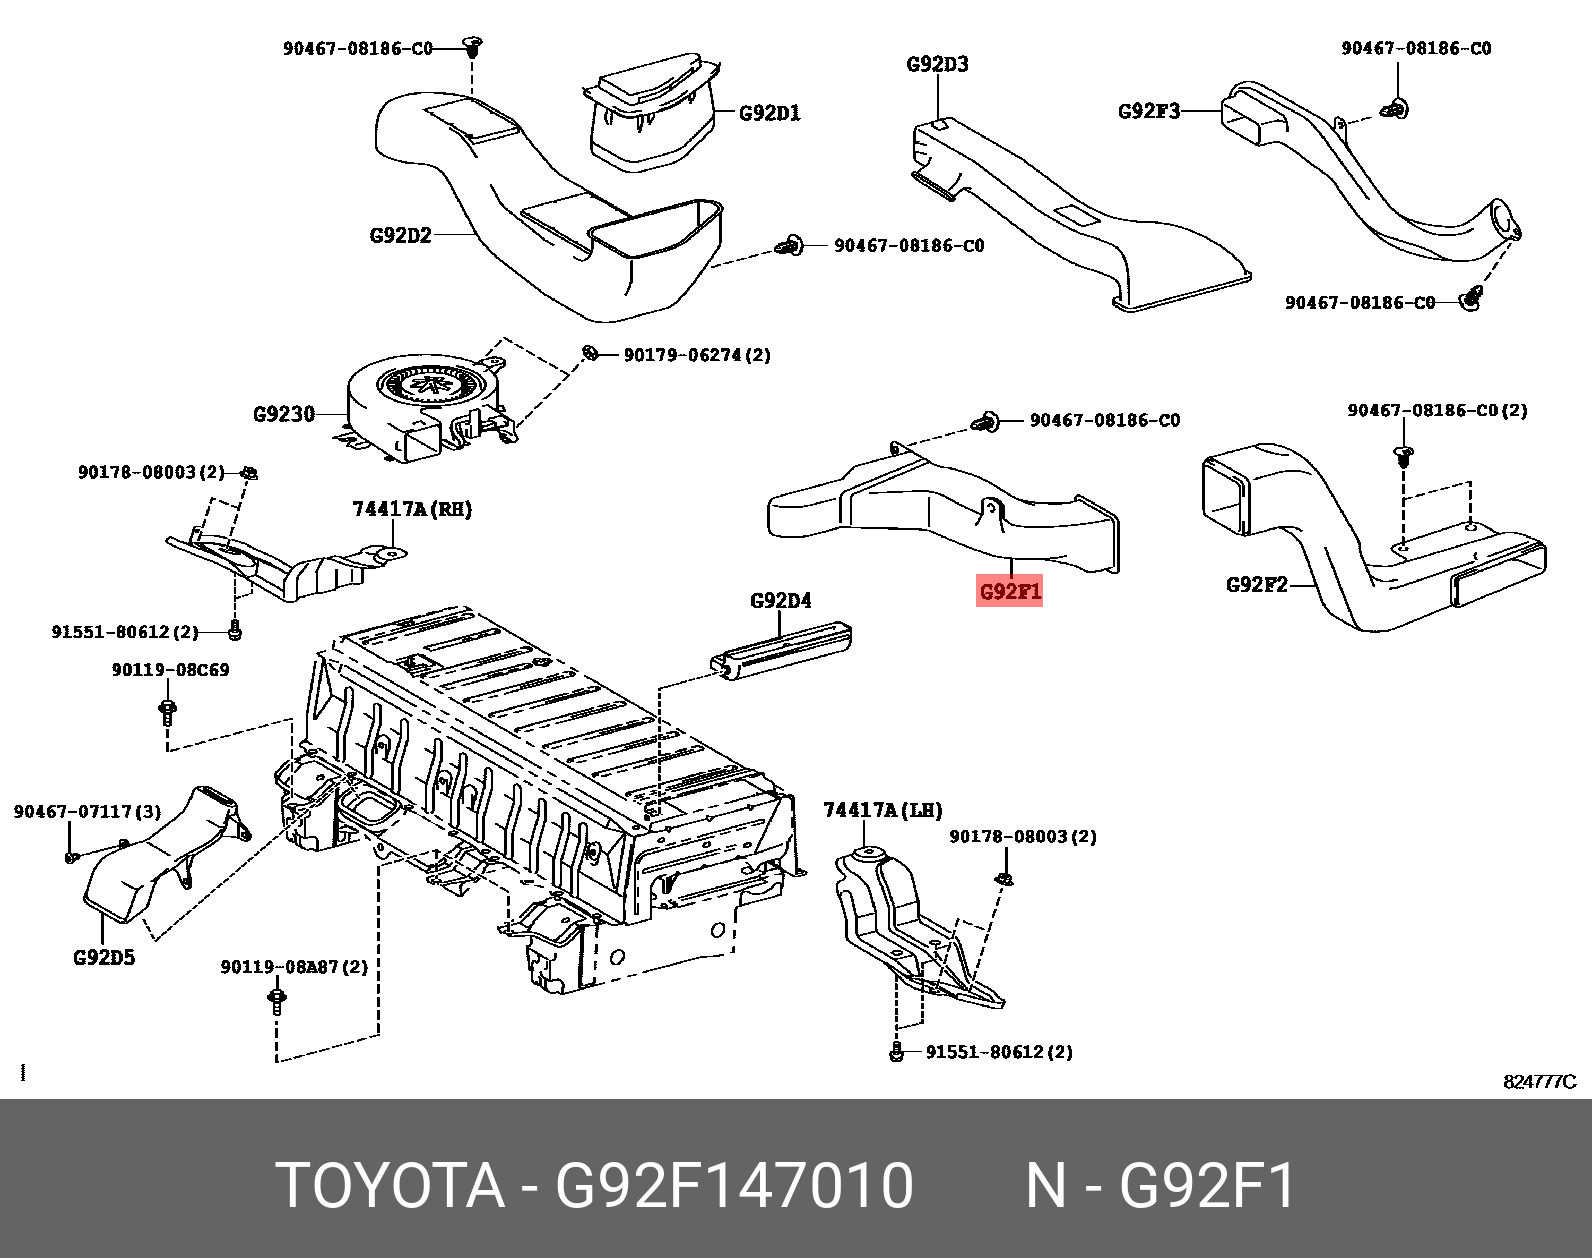 PRIUS 200904 - 201511, DUCT, HYBRID BATTERY EXHAUST, NO.1